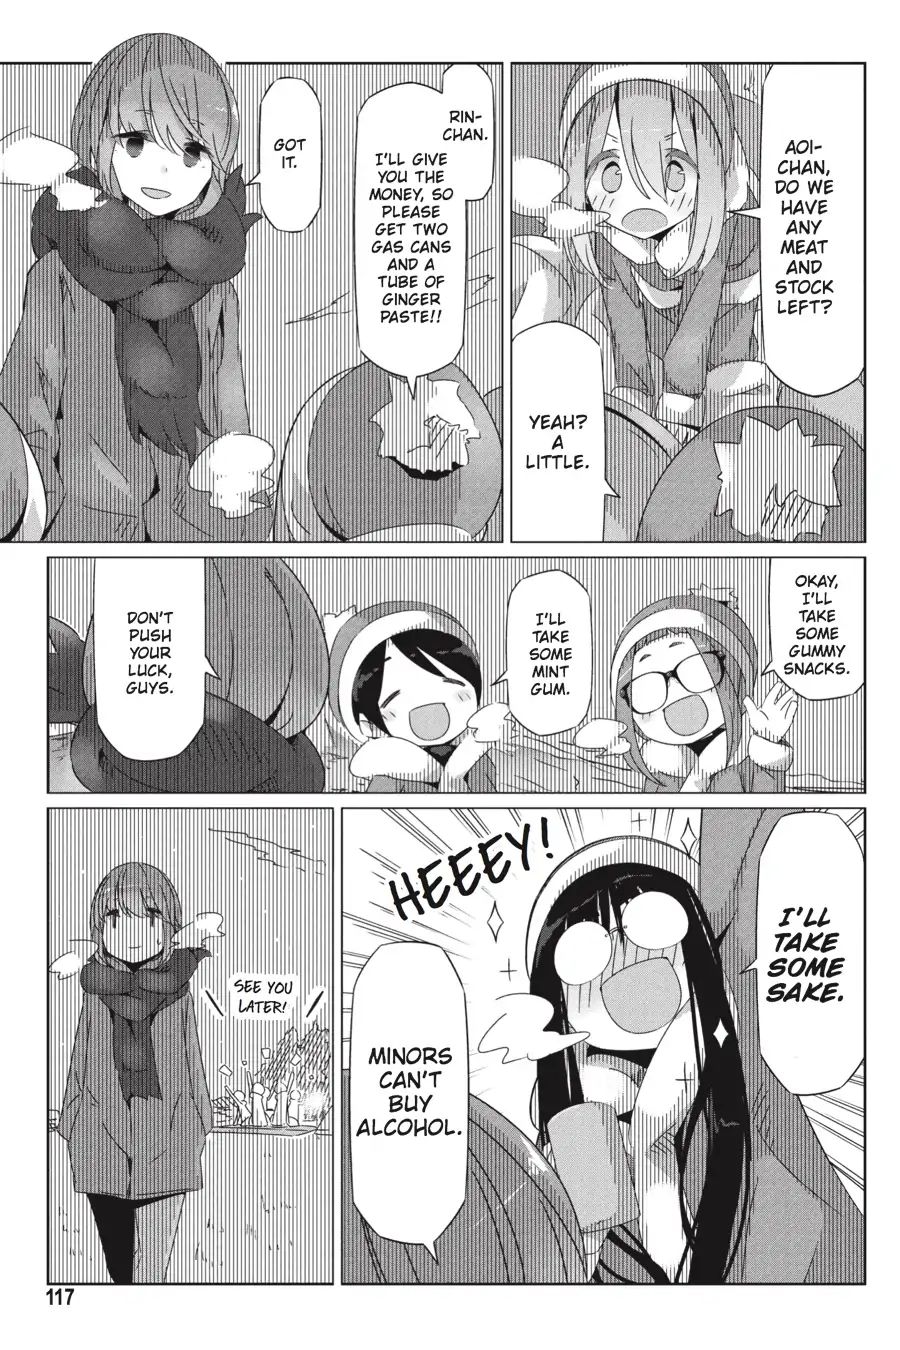 Yurucamp Vol.4 Chapter 22: A Special Meal